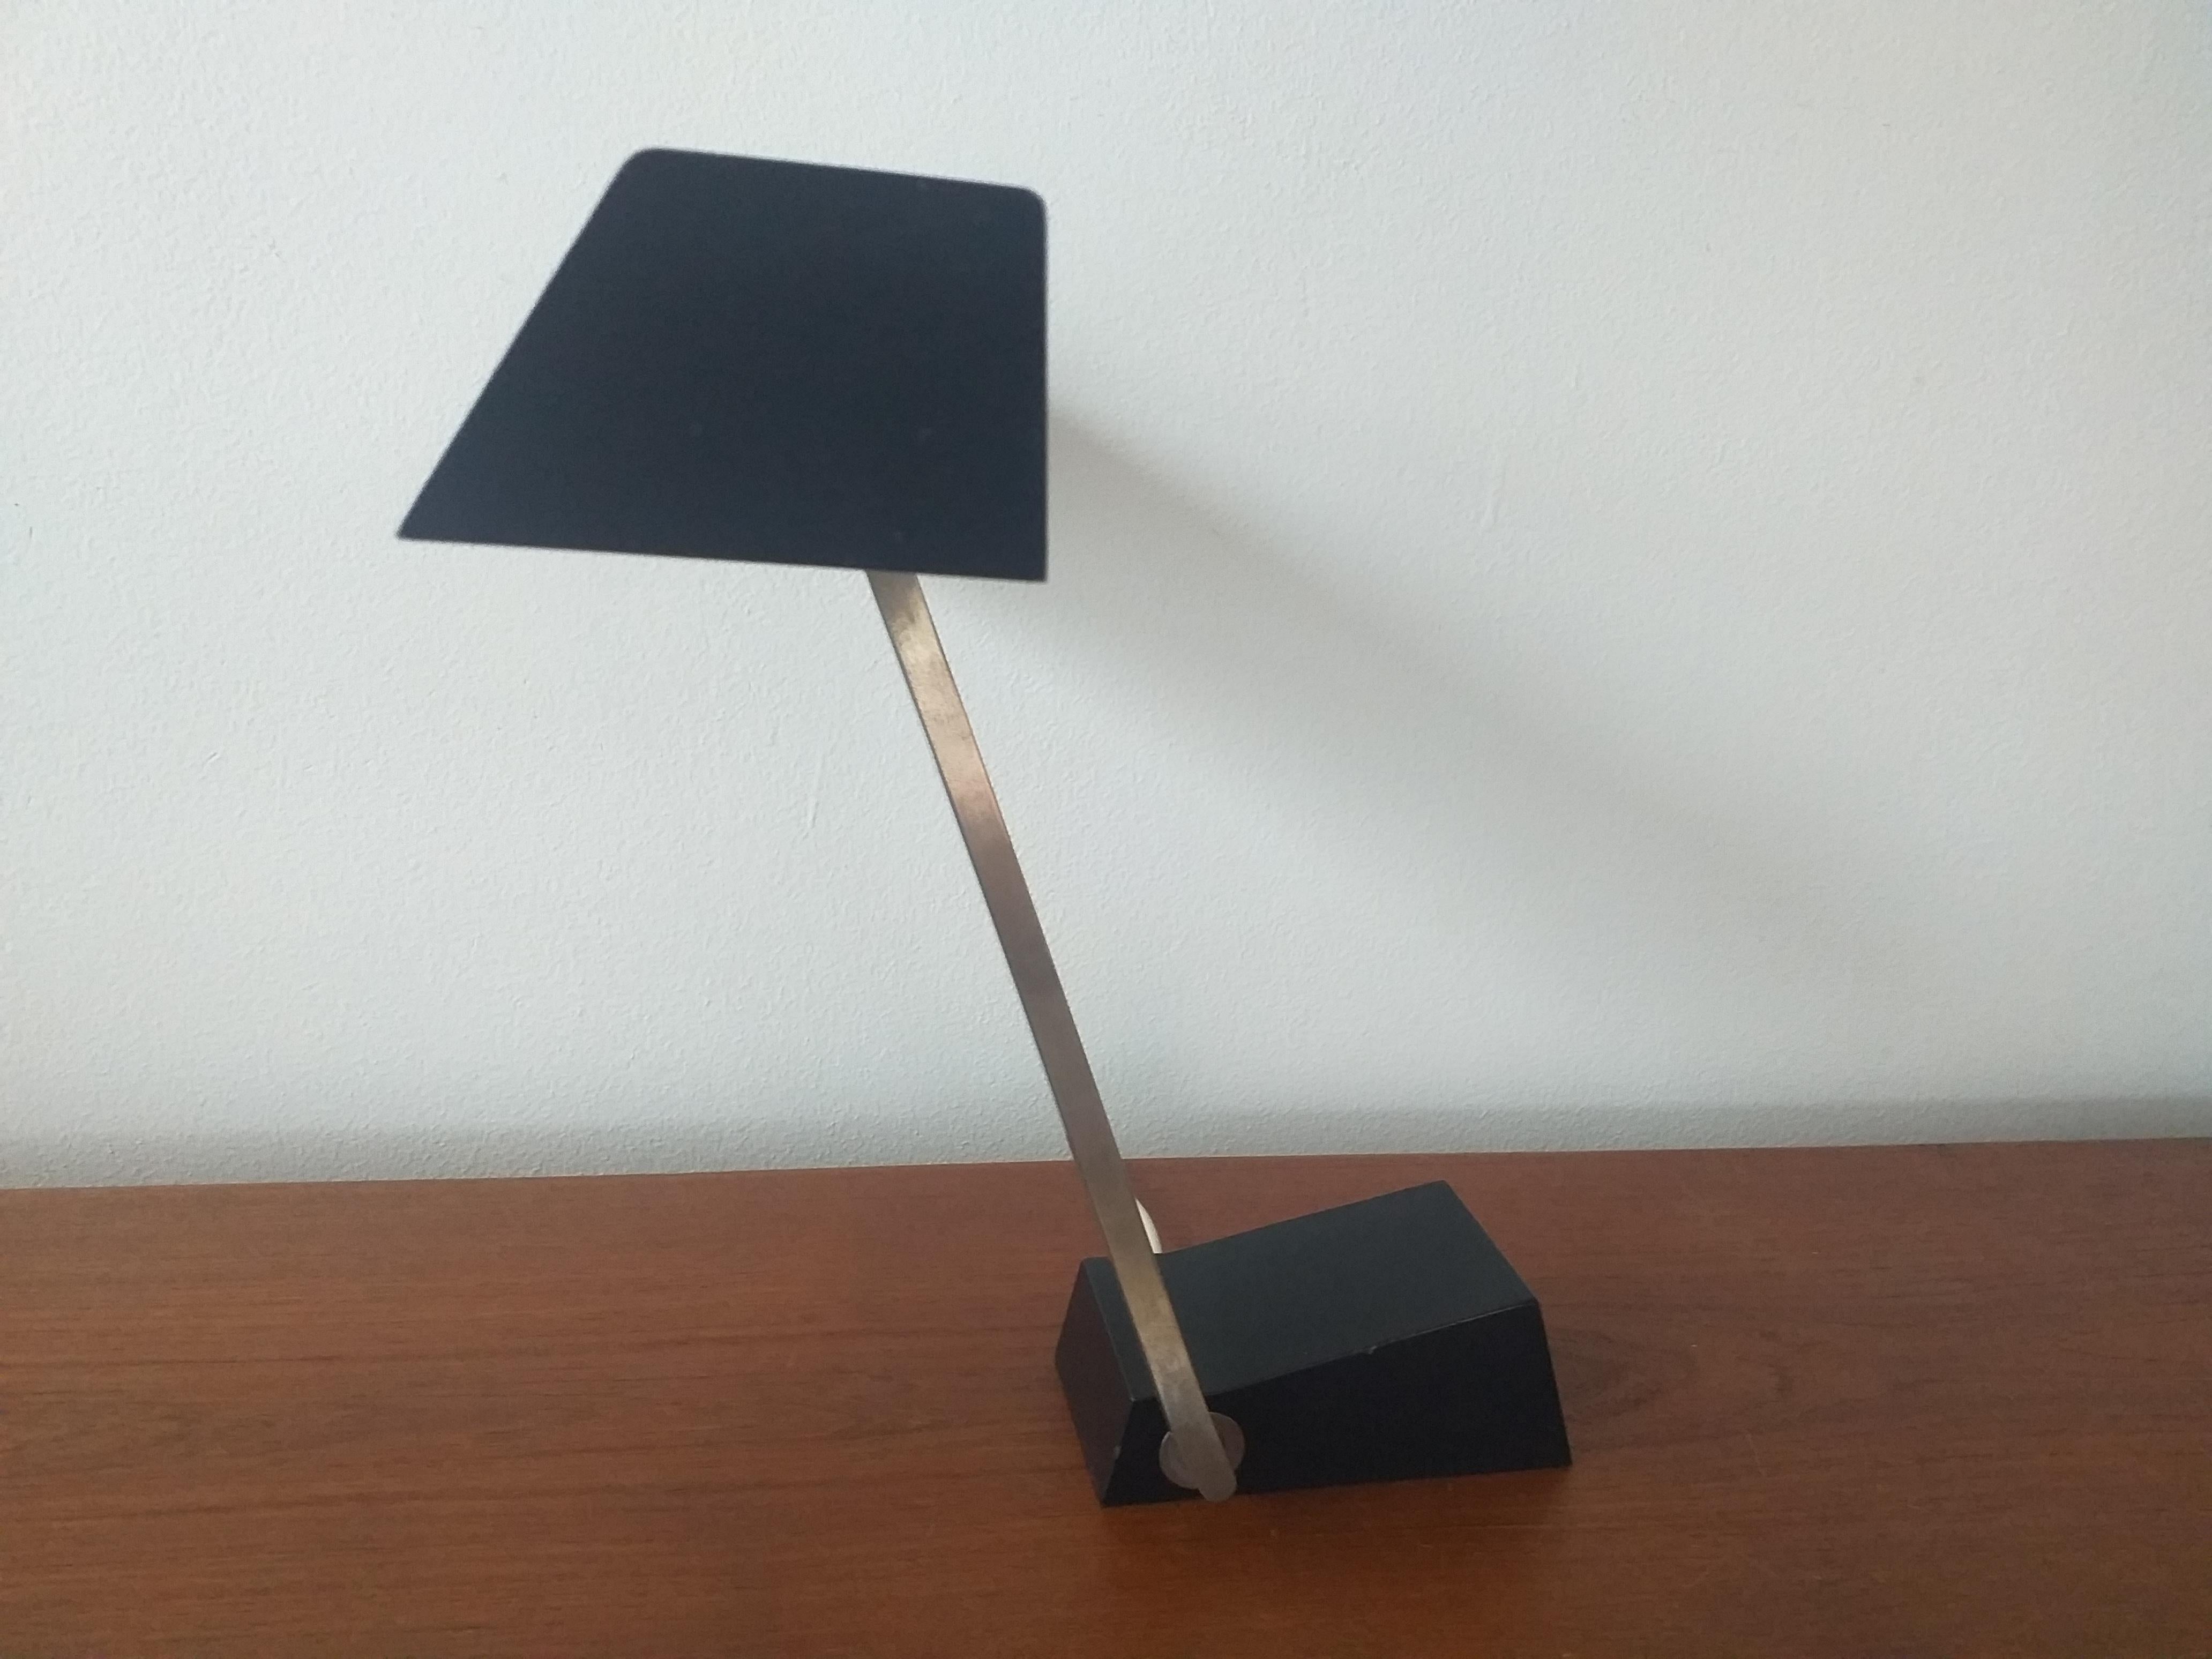 Metal Midcentury Table Lamp Designed by Heinz Pfaender for Hillebrand, 1960s